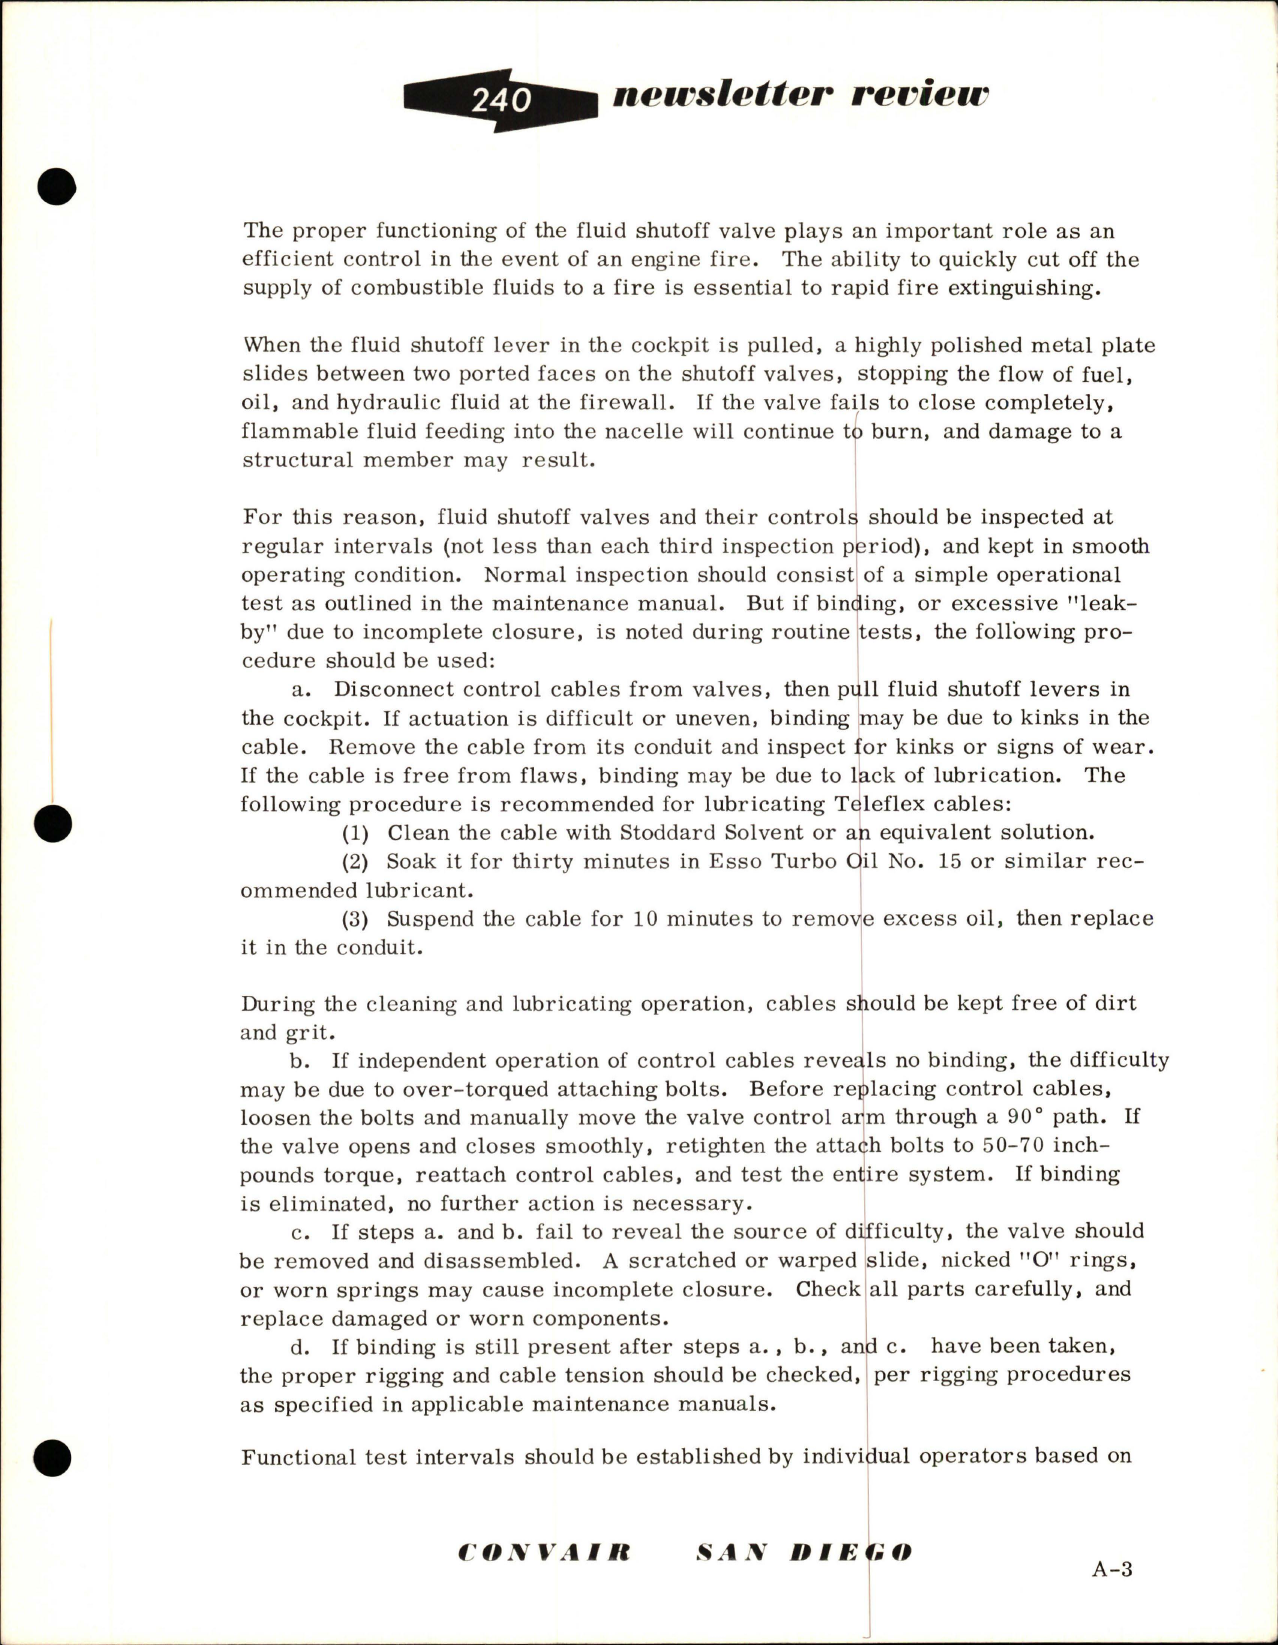 Sample page 9 from AirCorps Library document: Newsletter Review for Convair 240